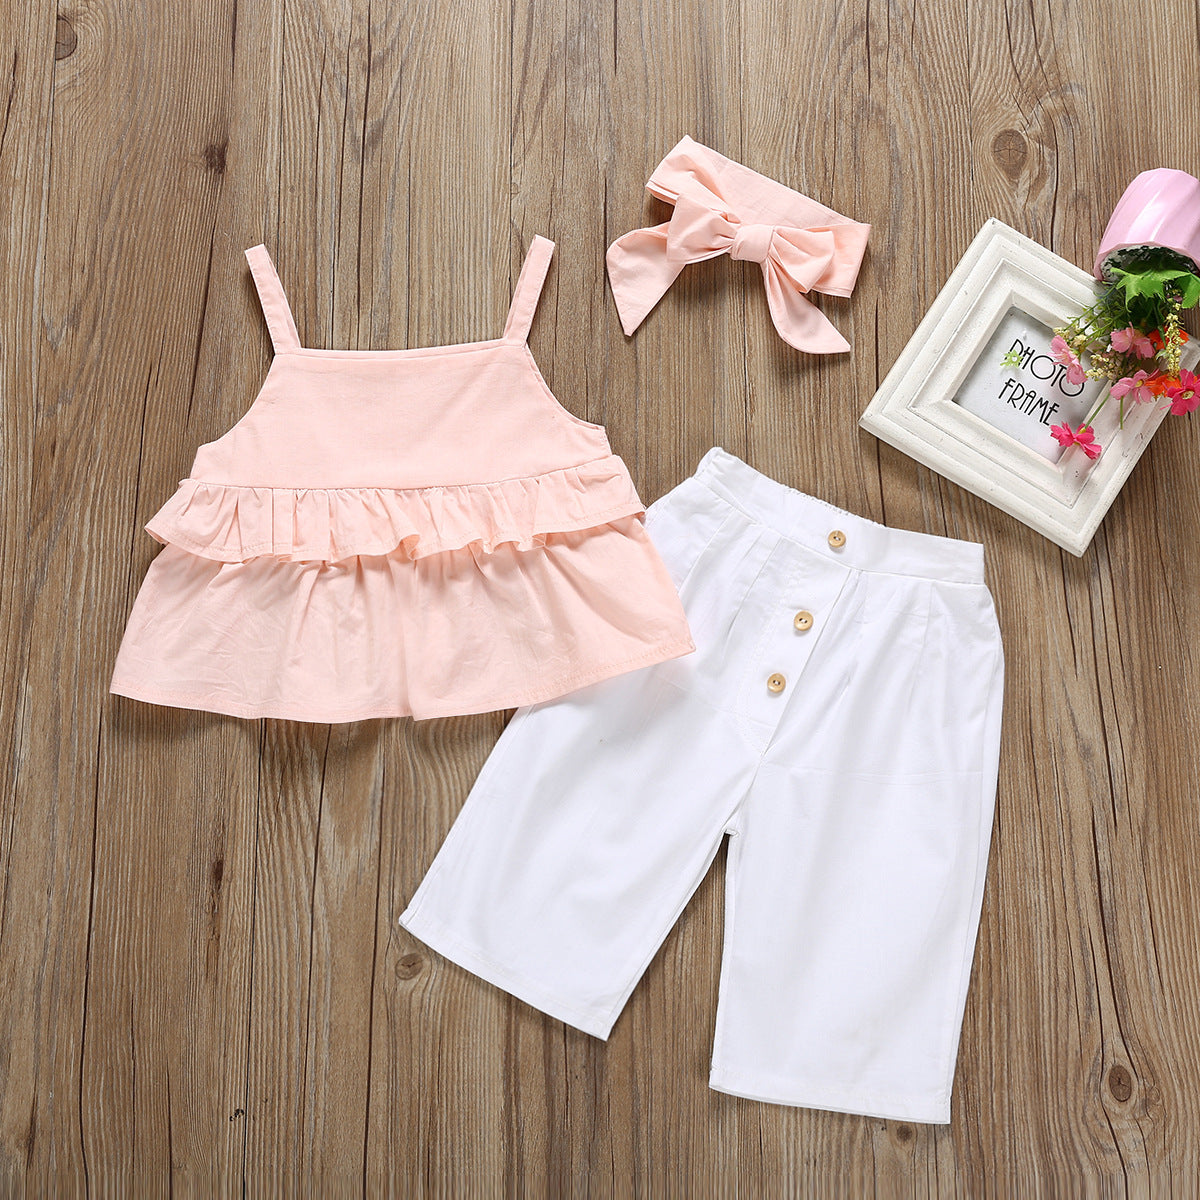 3-piece Cross-border European And American Children's Clothing